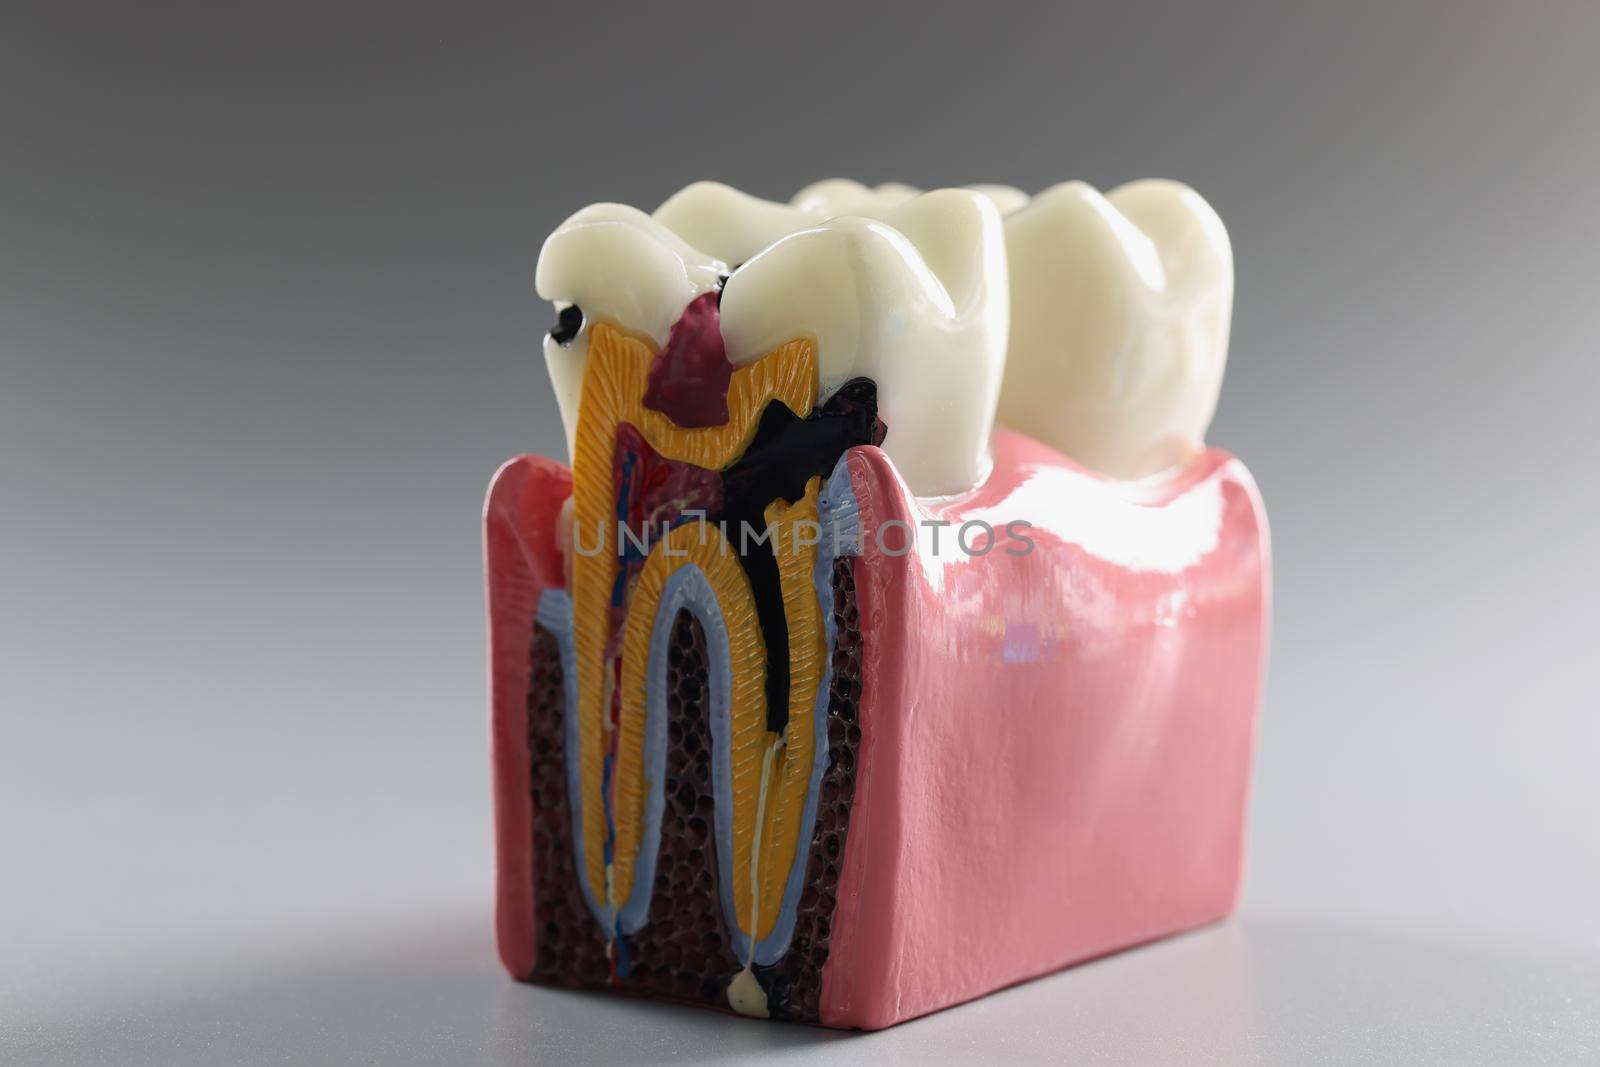 Teaching model of a tooth in cross section on a gray background, close-up. Learning resources for dentistry. Dental fillings